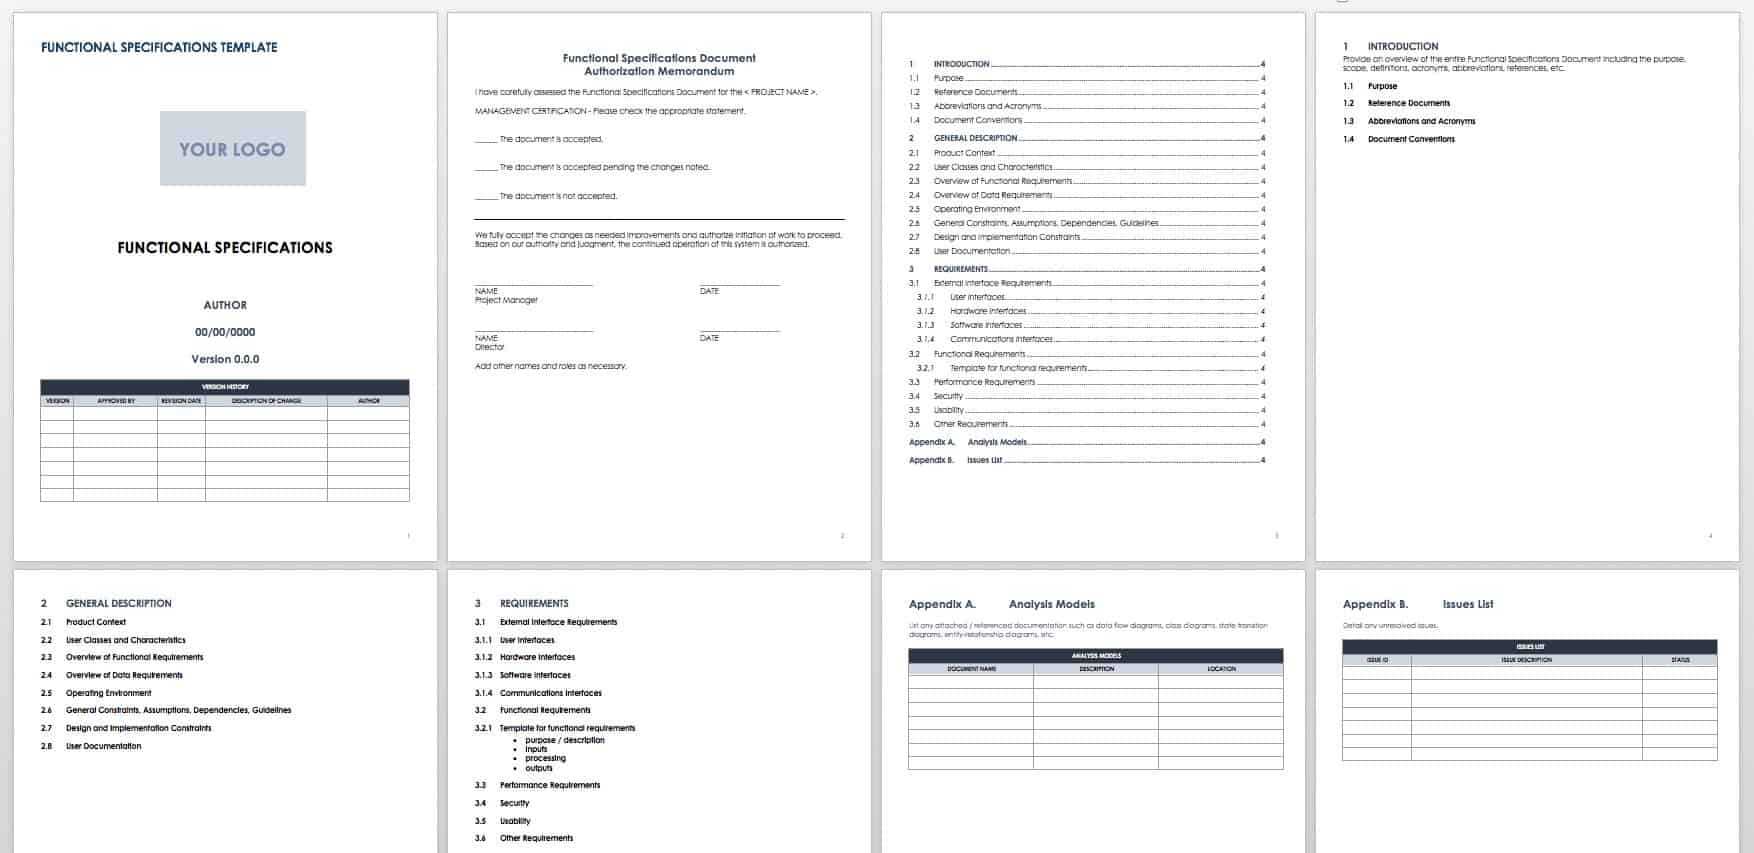 Free Functional Specification Templates | Smartsheet Intended For Reporting Requirements Template